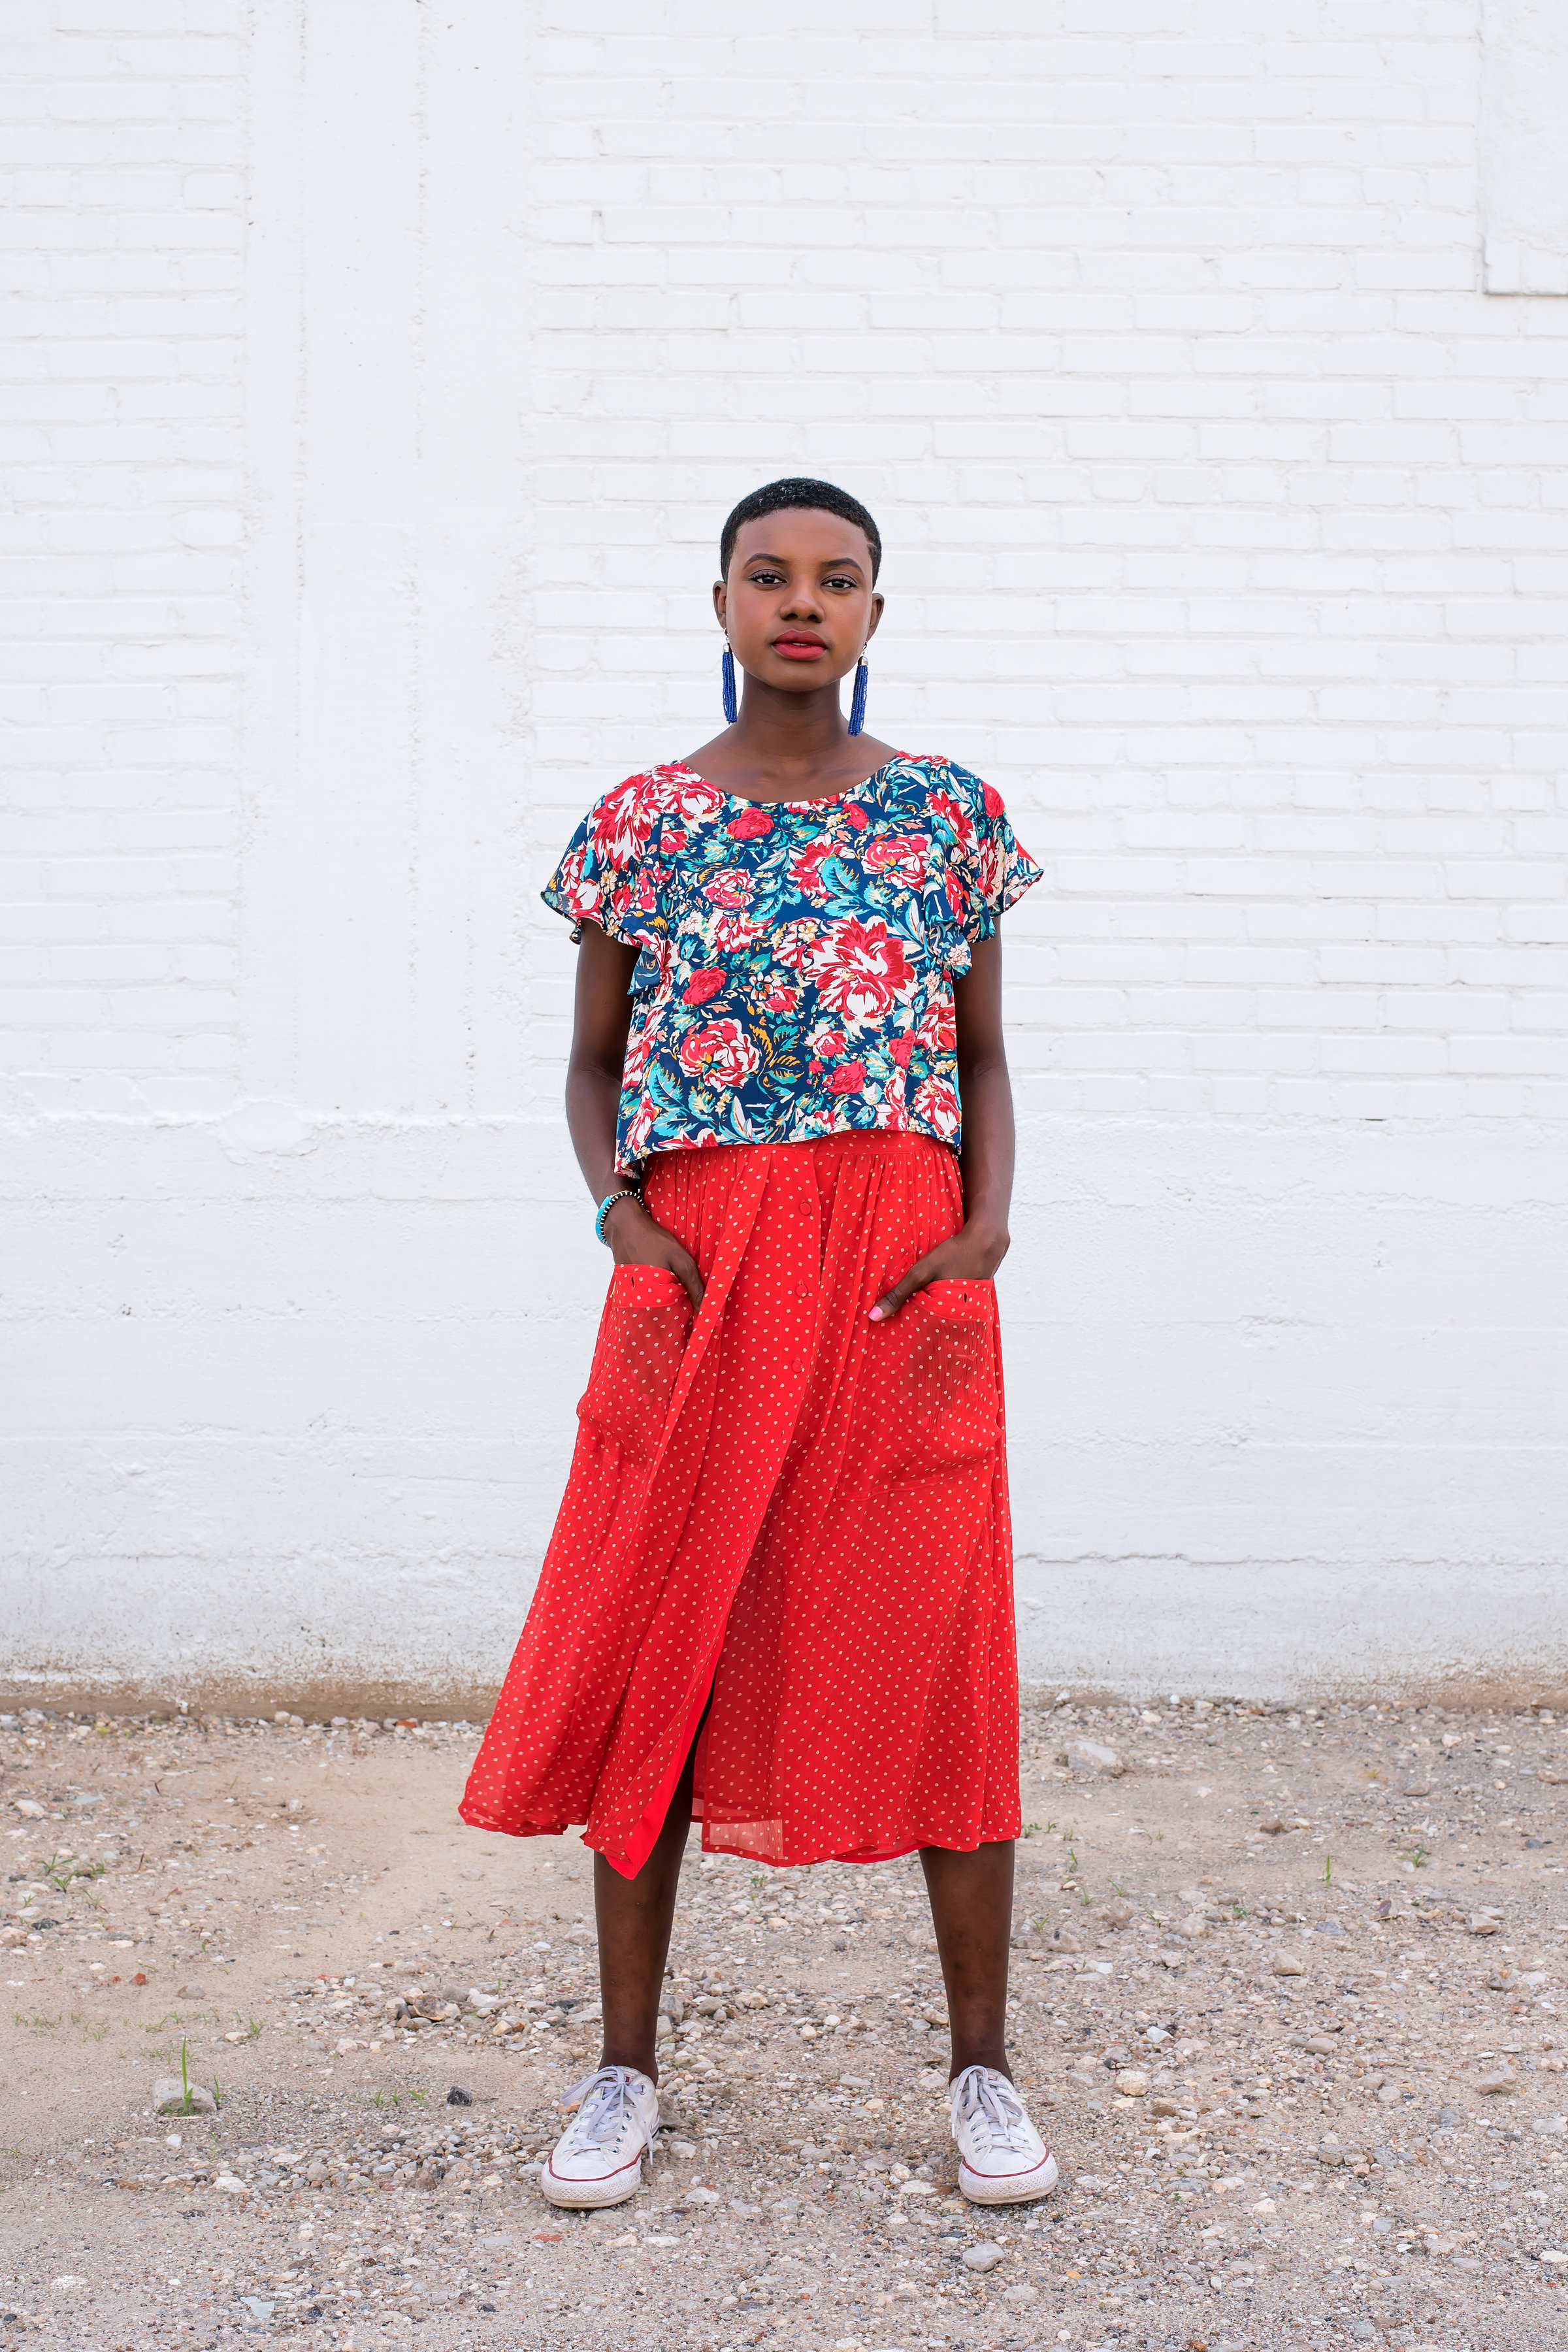 Natural hair model, spring style, summer style, converse with skirt